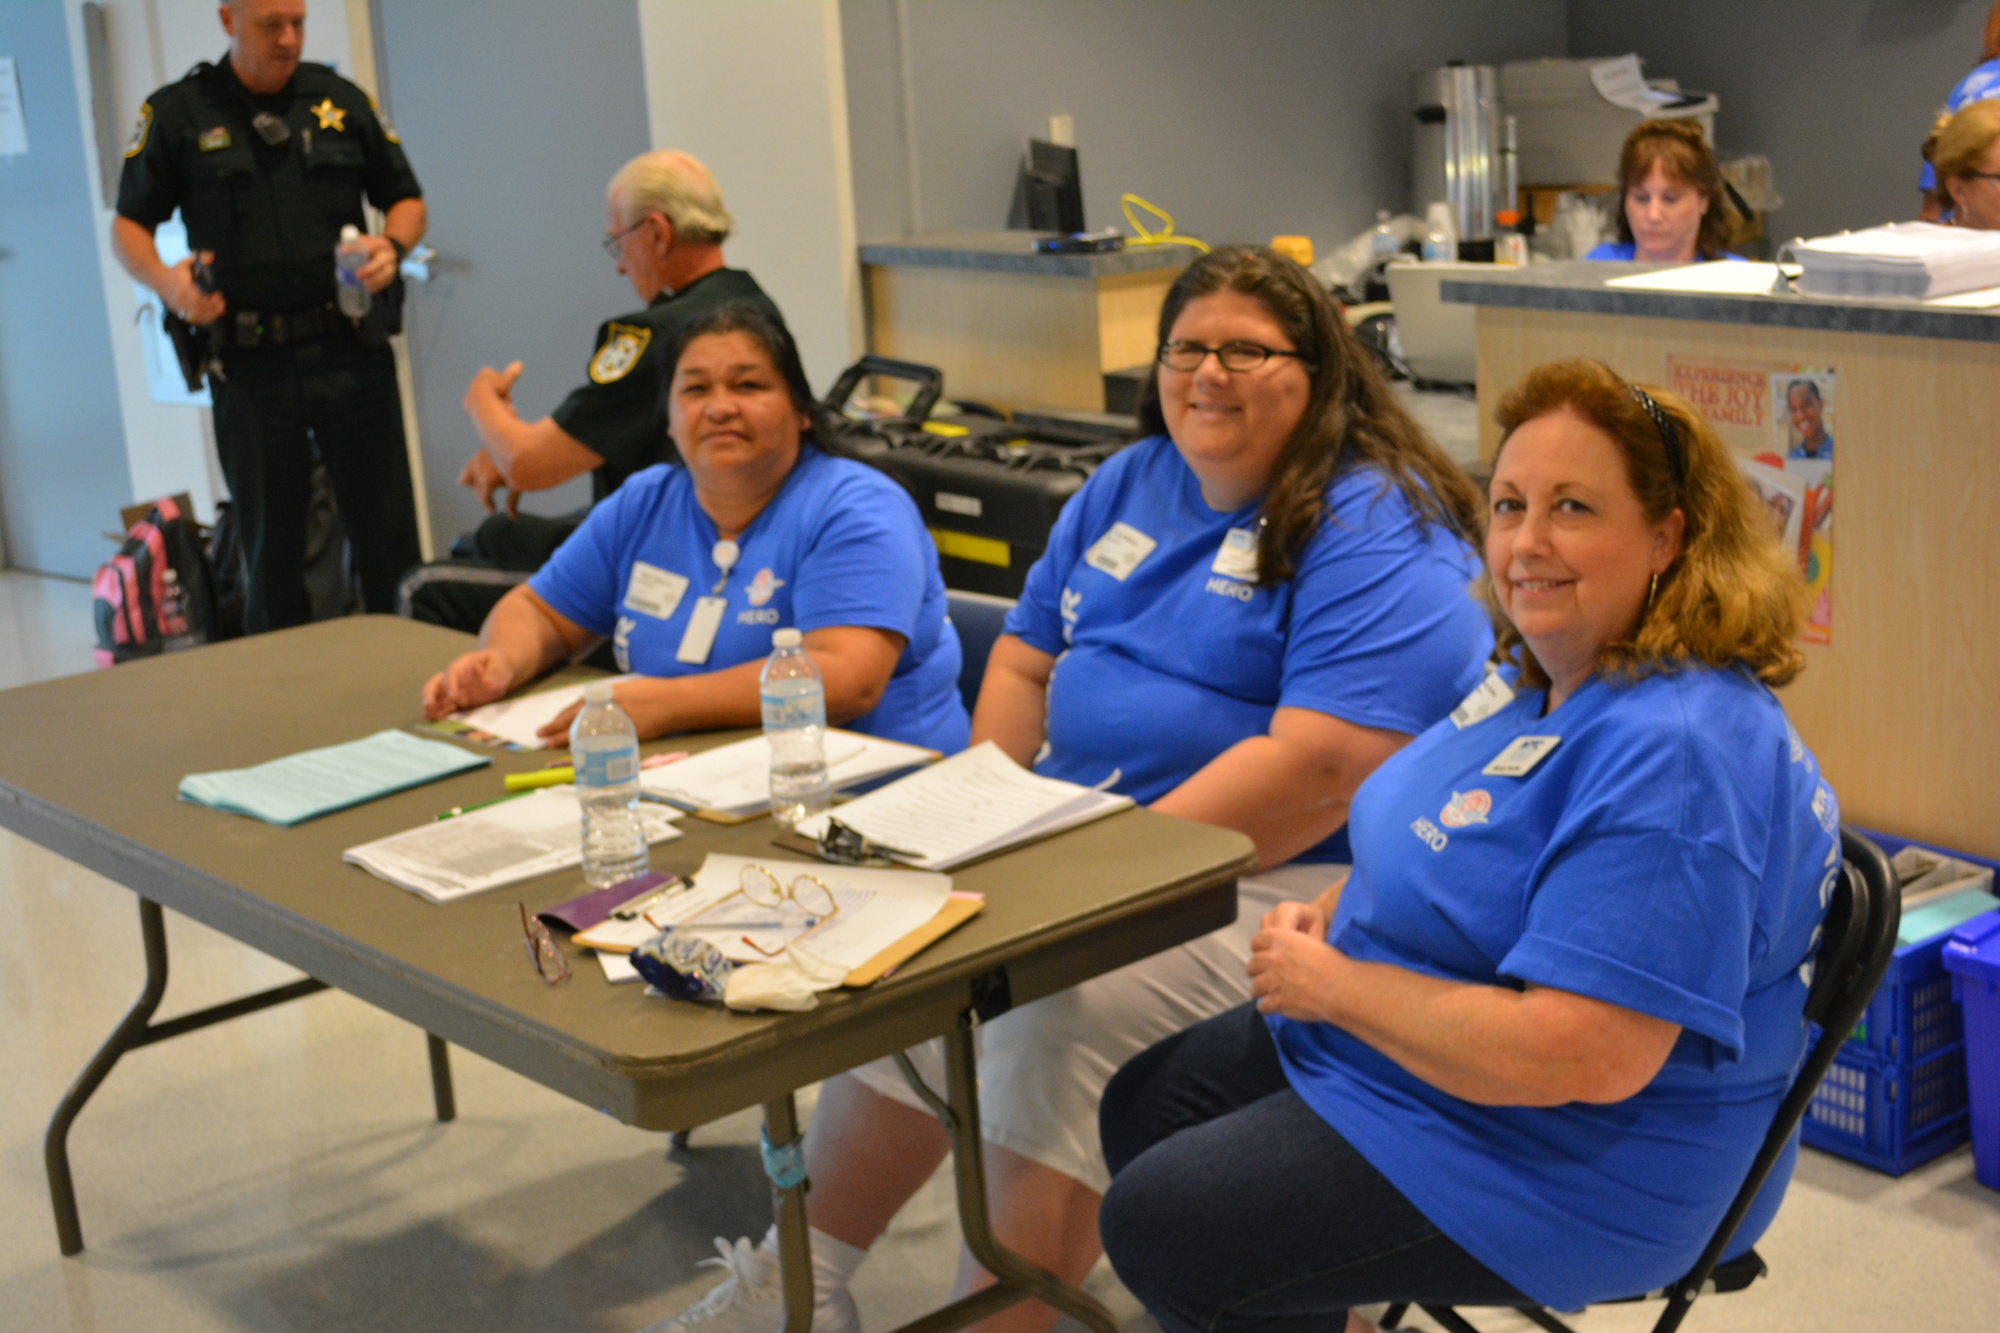 Bradenton's Mary Guerrero, Emma Markum and Mandy Steffen, all employees at Manatee Technical College, donated their time to check in patients at the Remote Area Medical clinic.